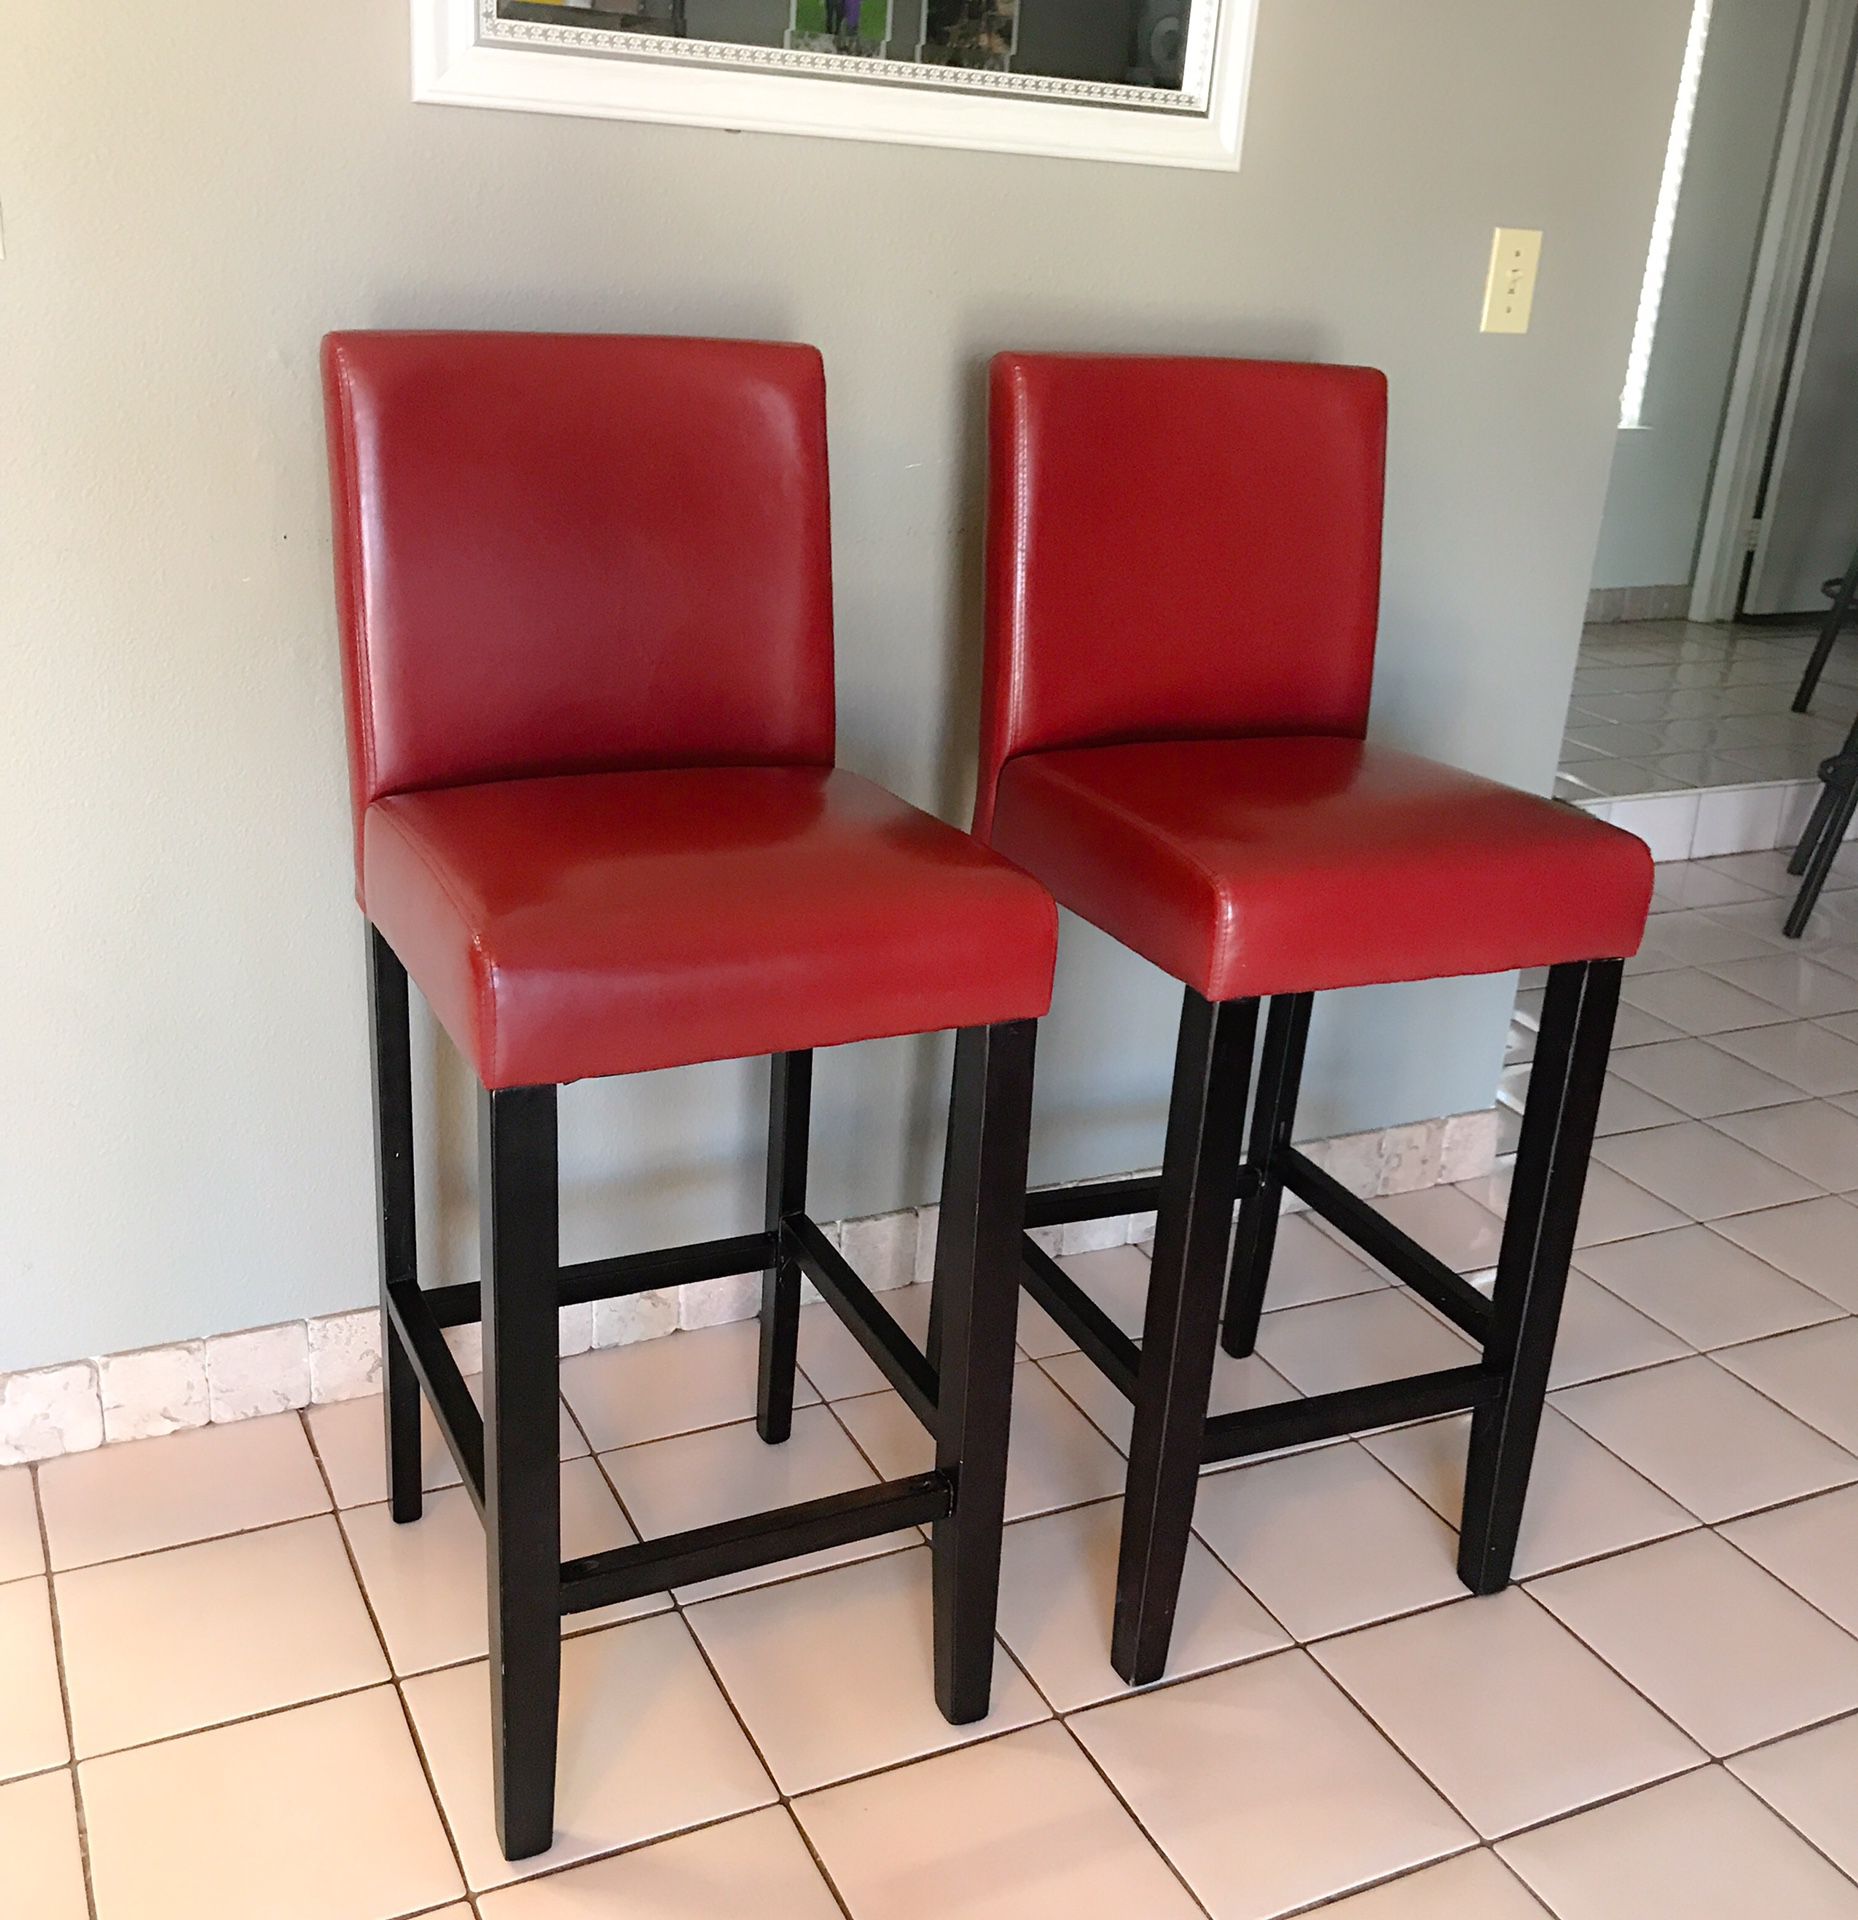 Villa Faux Leather Counter Bar Stools (Set of 2) - Red